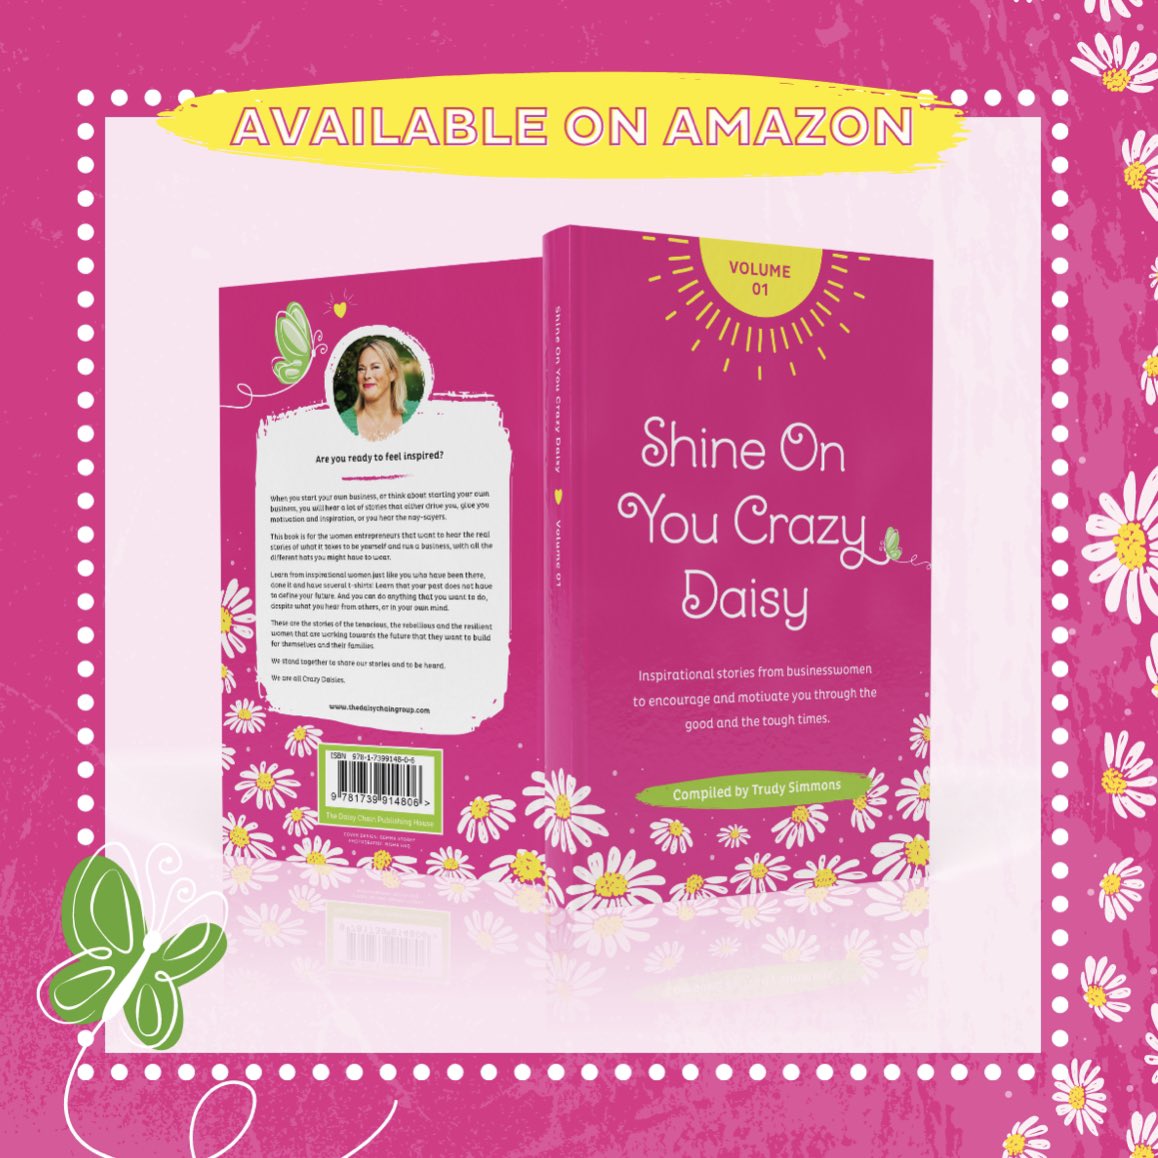 Announcement time…. I’m going to be in volume 2 of this set of books. So please buy volume 1 and help it get off to a great start. 

#ShineOnYouCrazyDaisy 

amazon.co.uk/Shine-Crazy-Da…